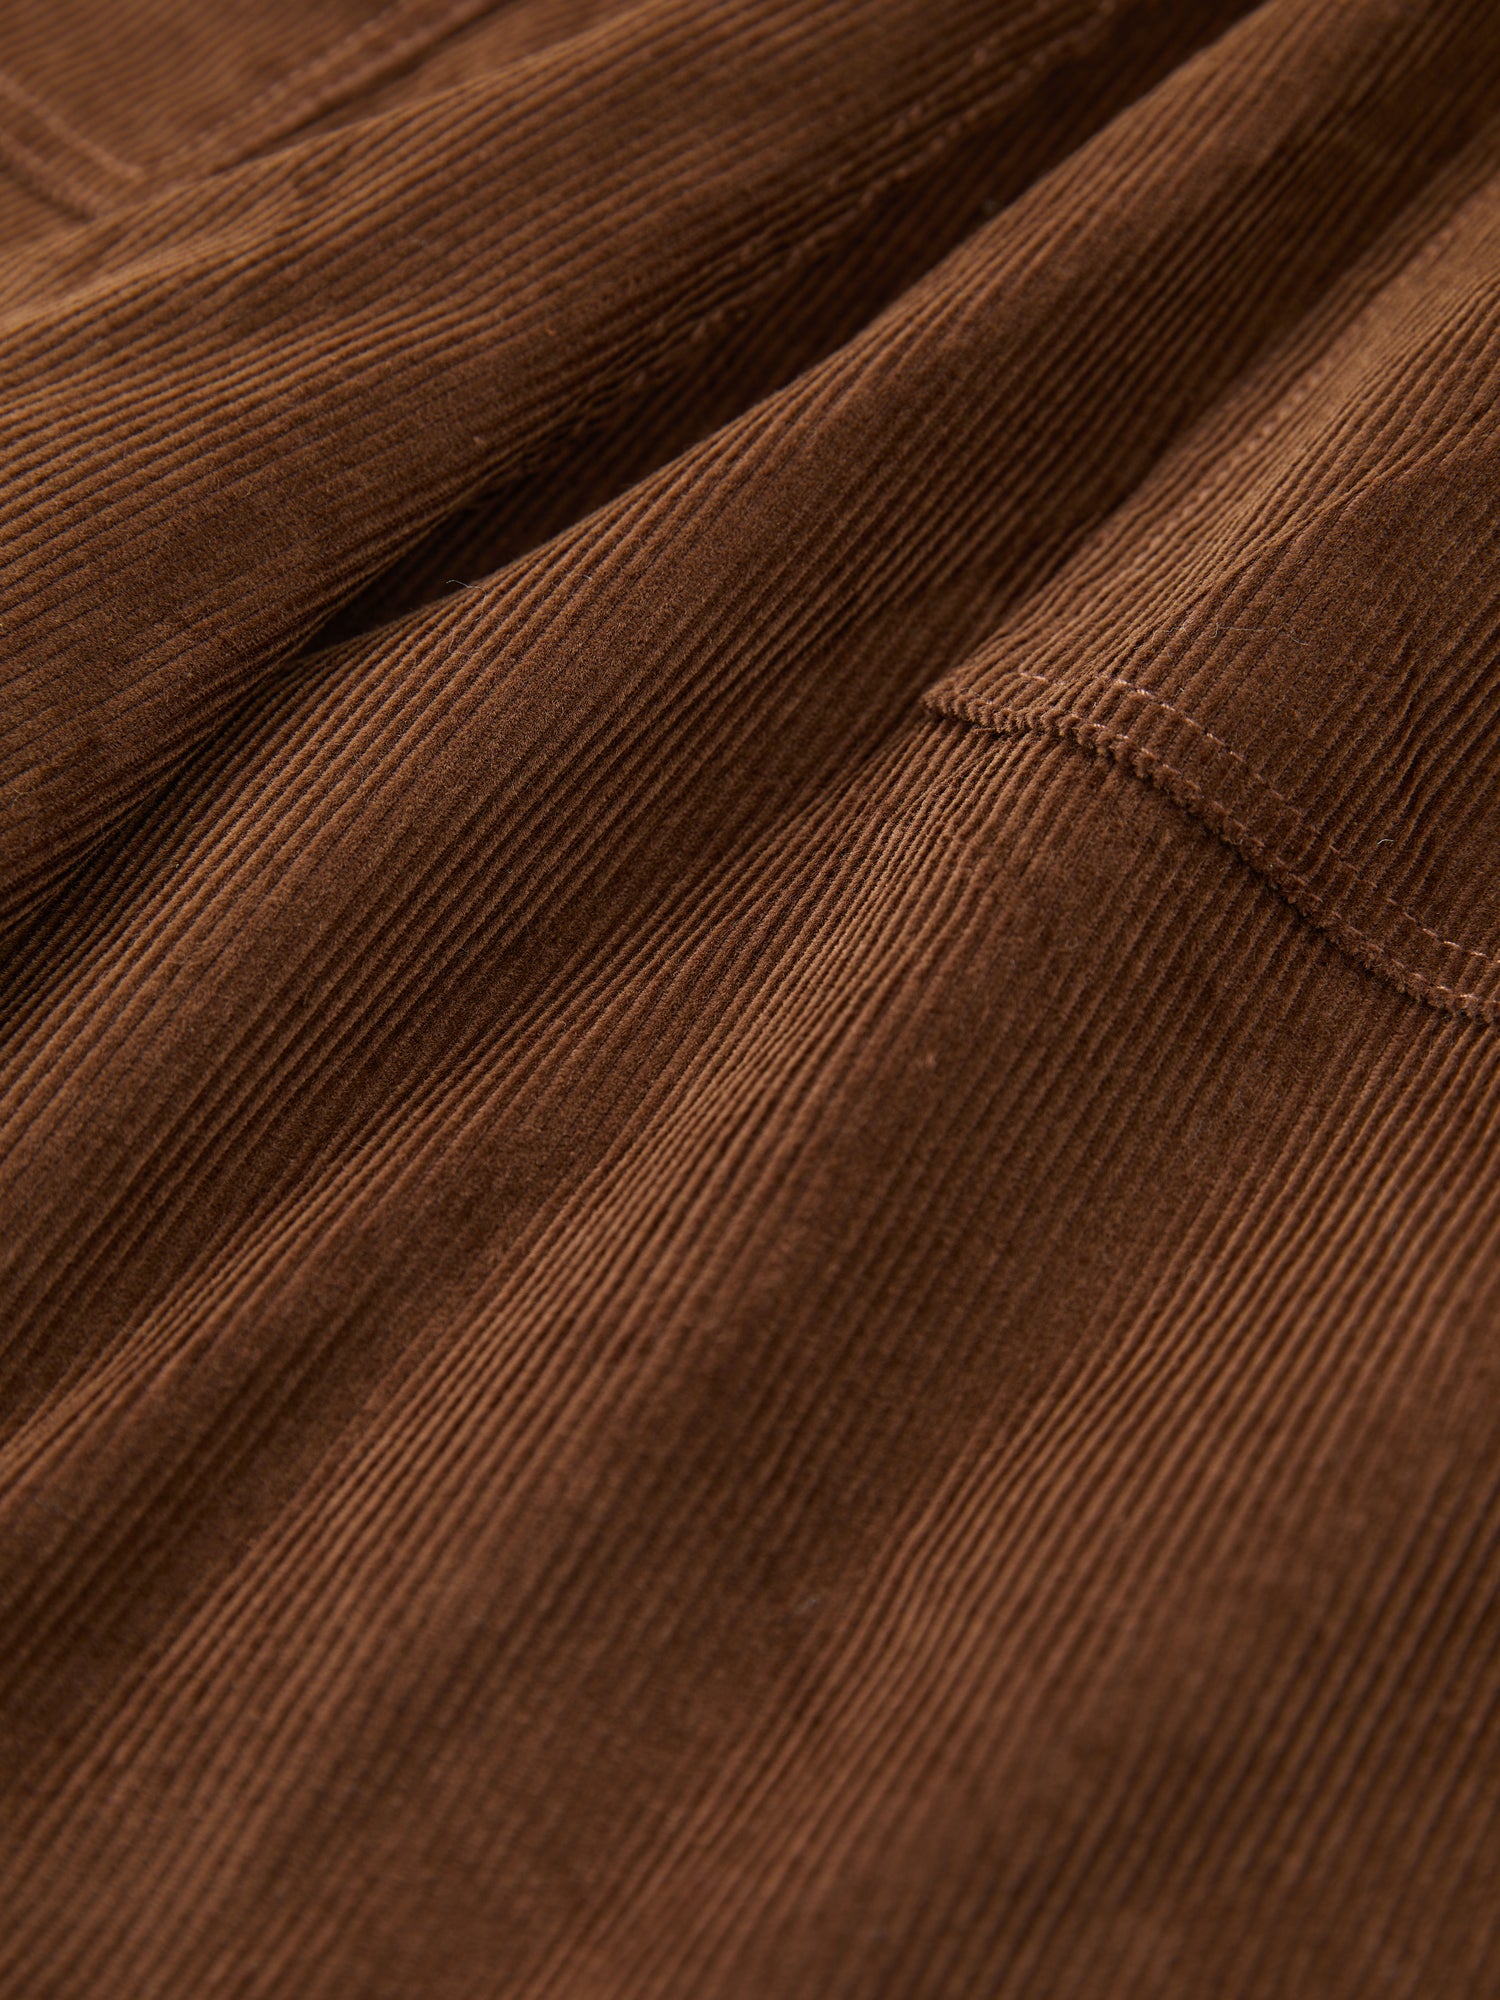 A close up image of a Found Canoe Multi Patch Corduroy Shorts jacket.